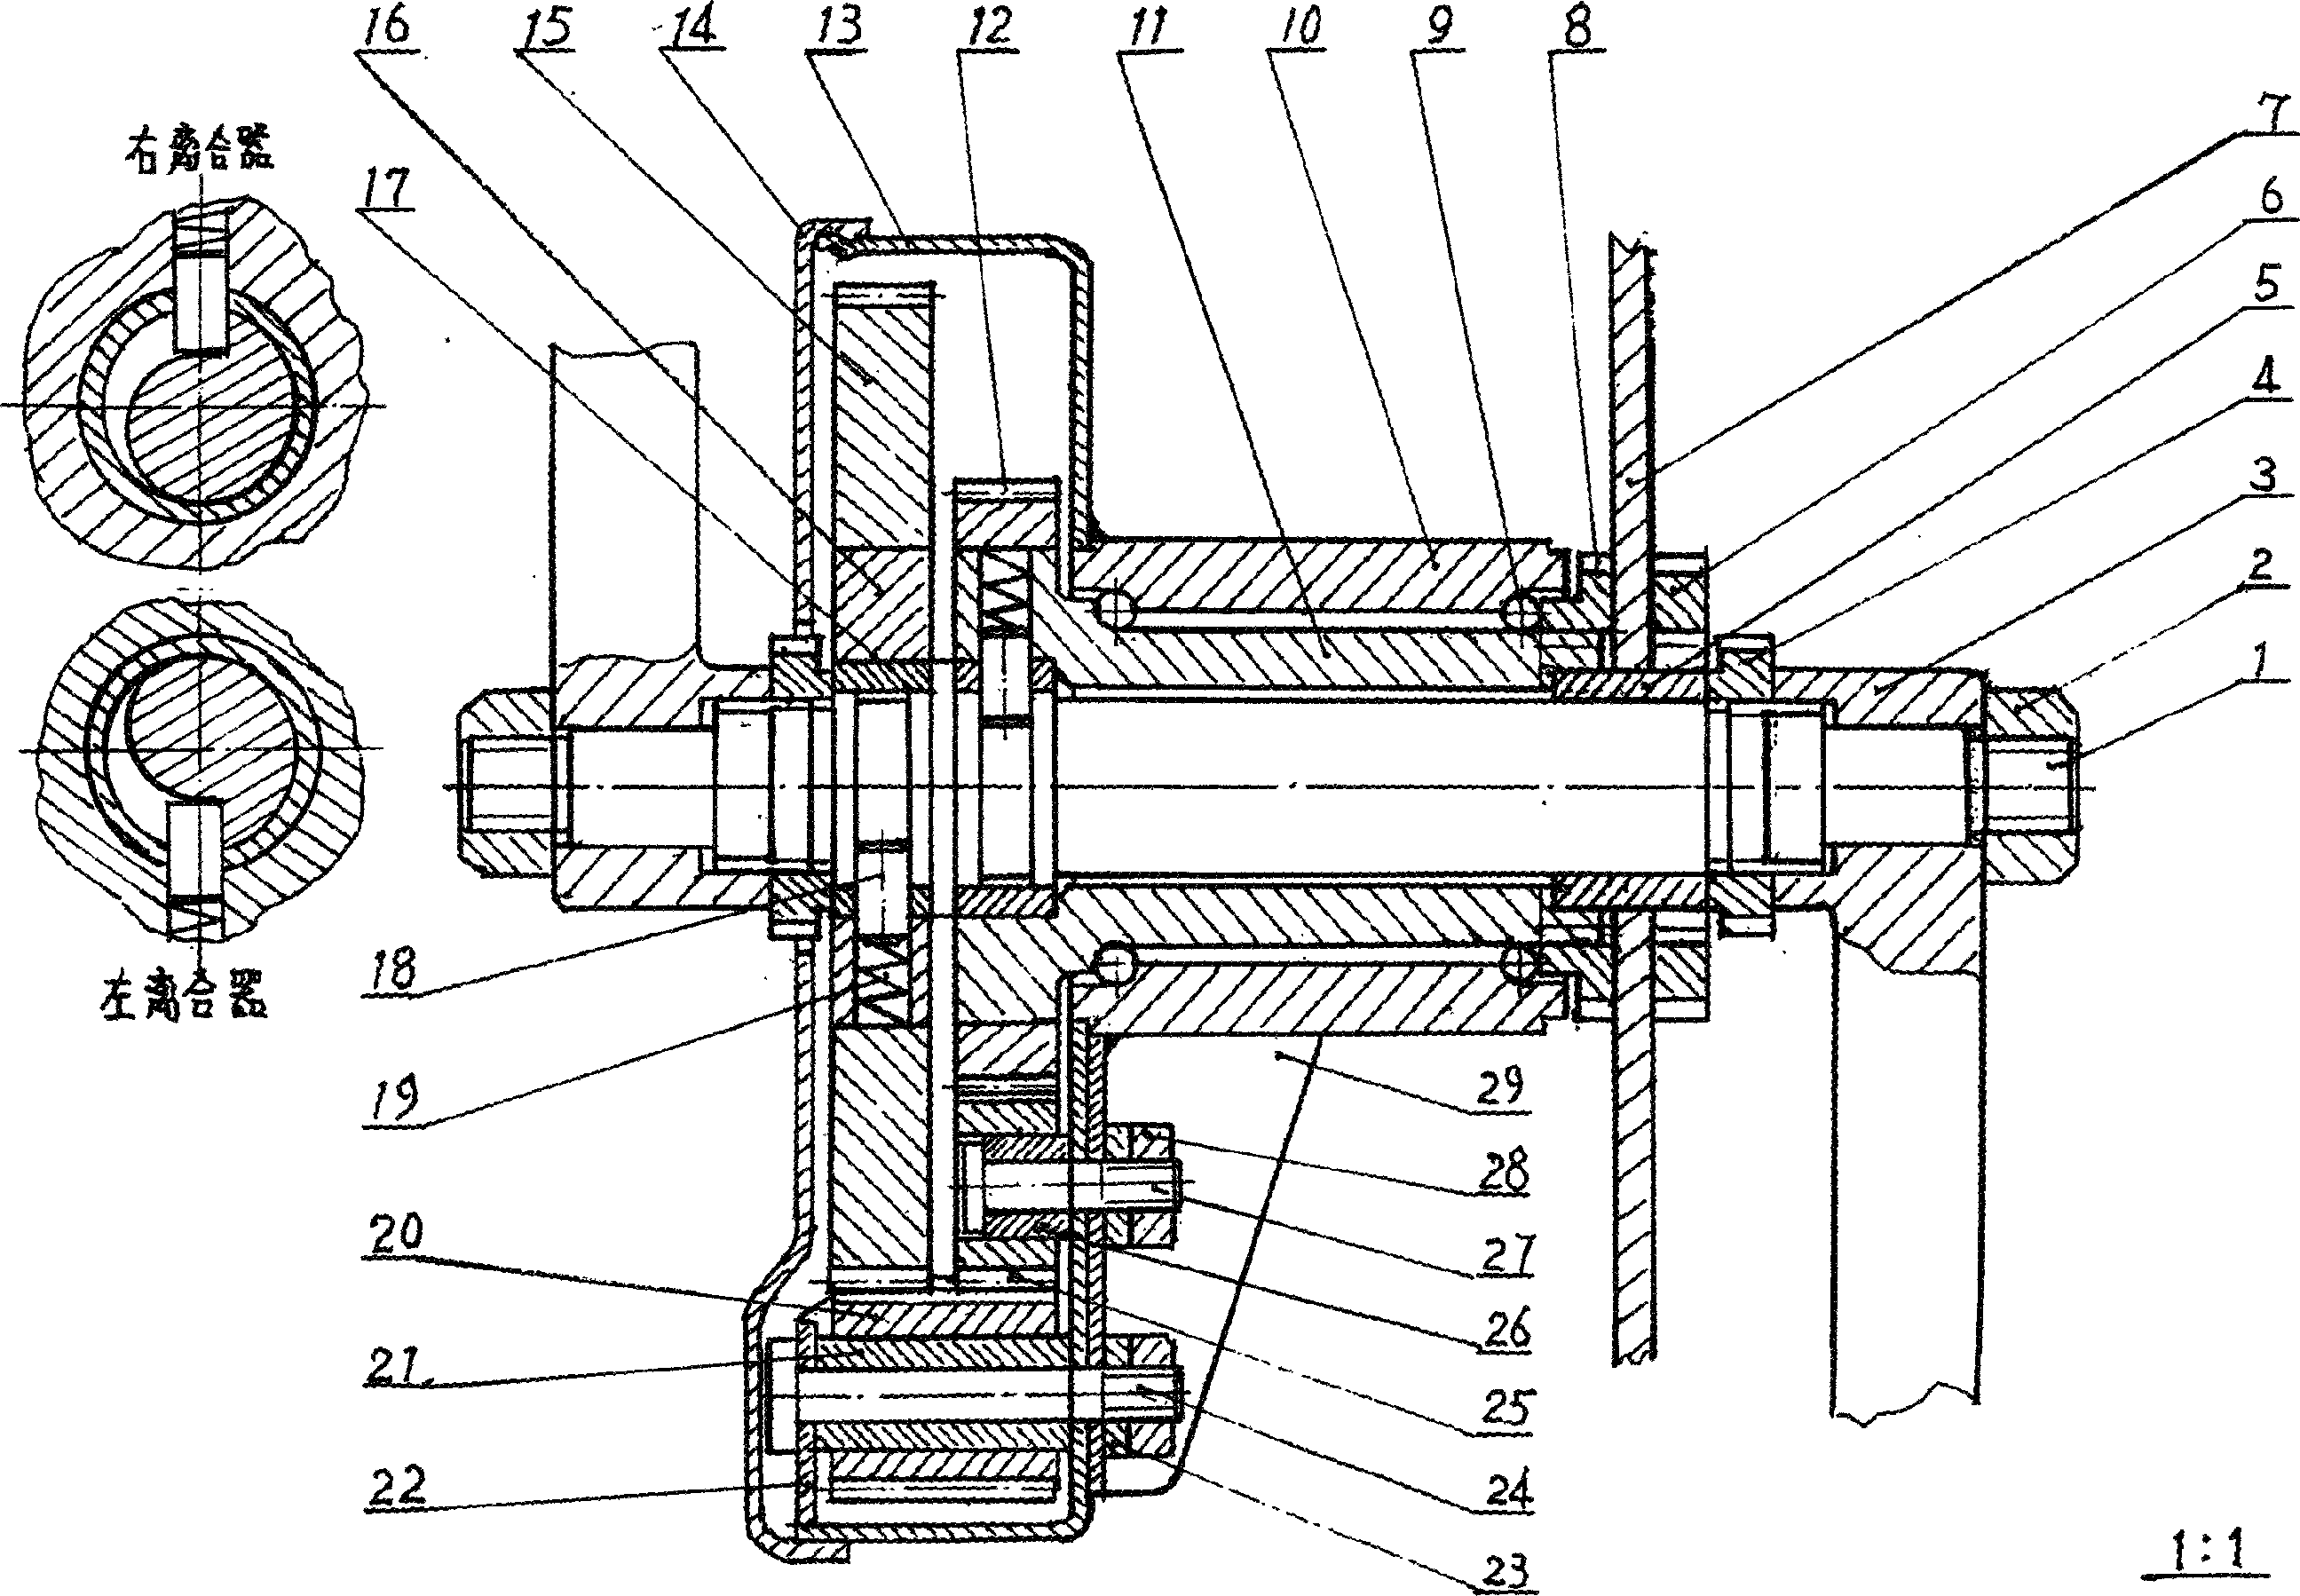 Reverse pedaling and accelerating mechanism for bicycle